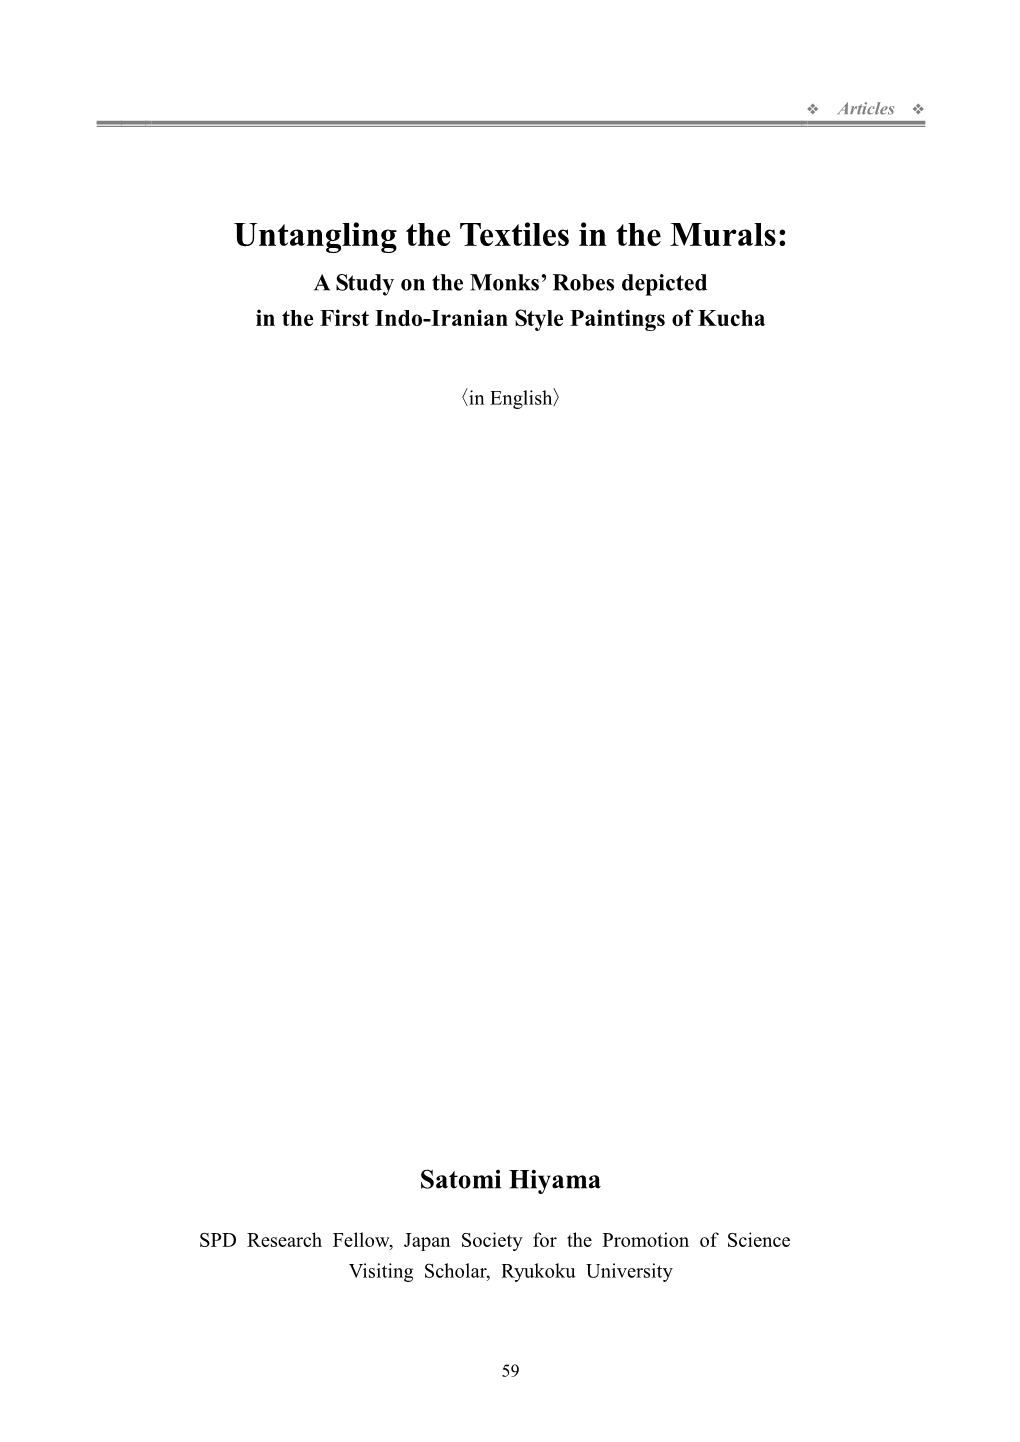 Untangling the Textiles in the Murals: a Study on the Monks’ Robes Depicted in the First Indo-Iranian Style Paintings of Kucha